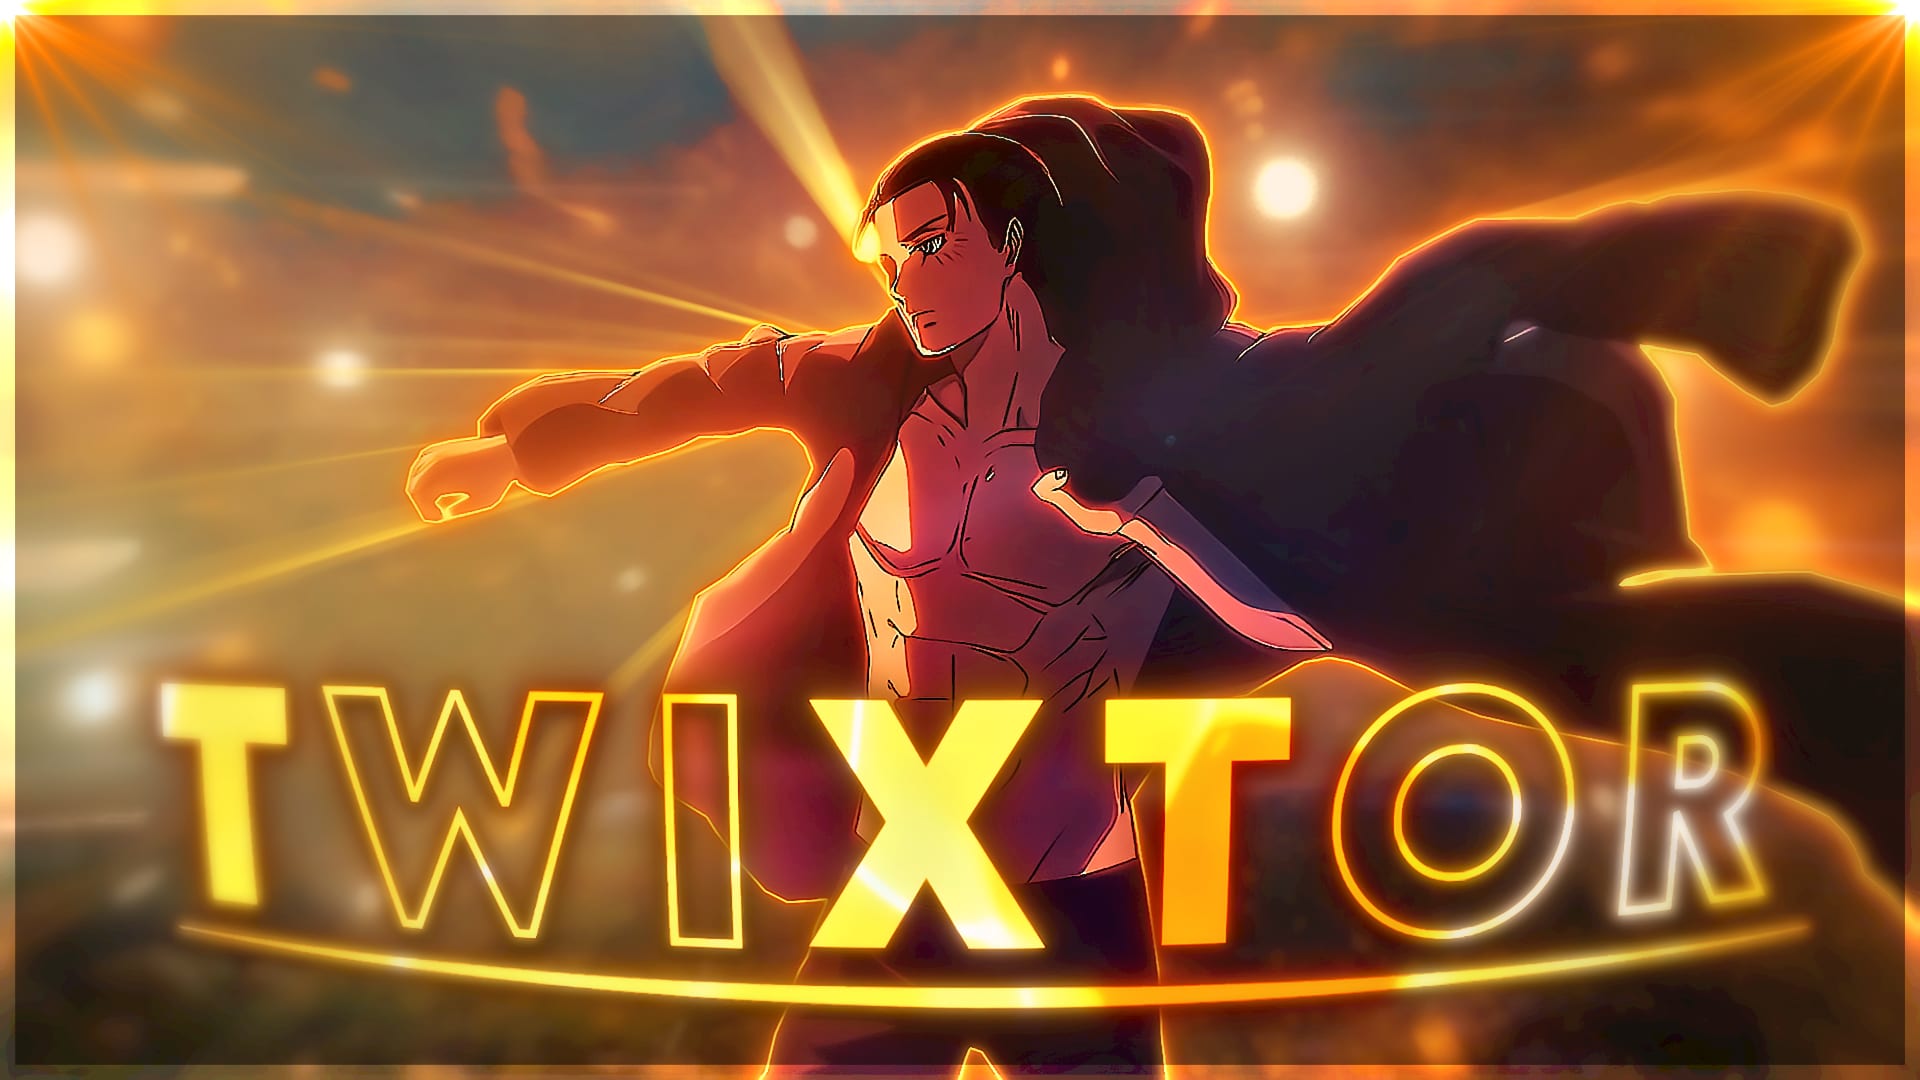 Popular Anime Mix Twixtor Clips for Editing